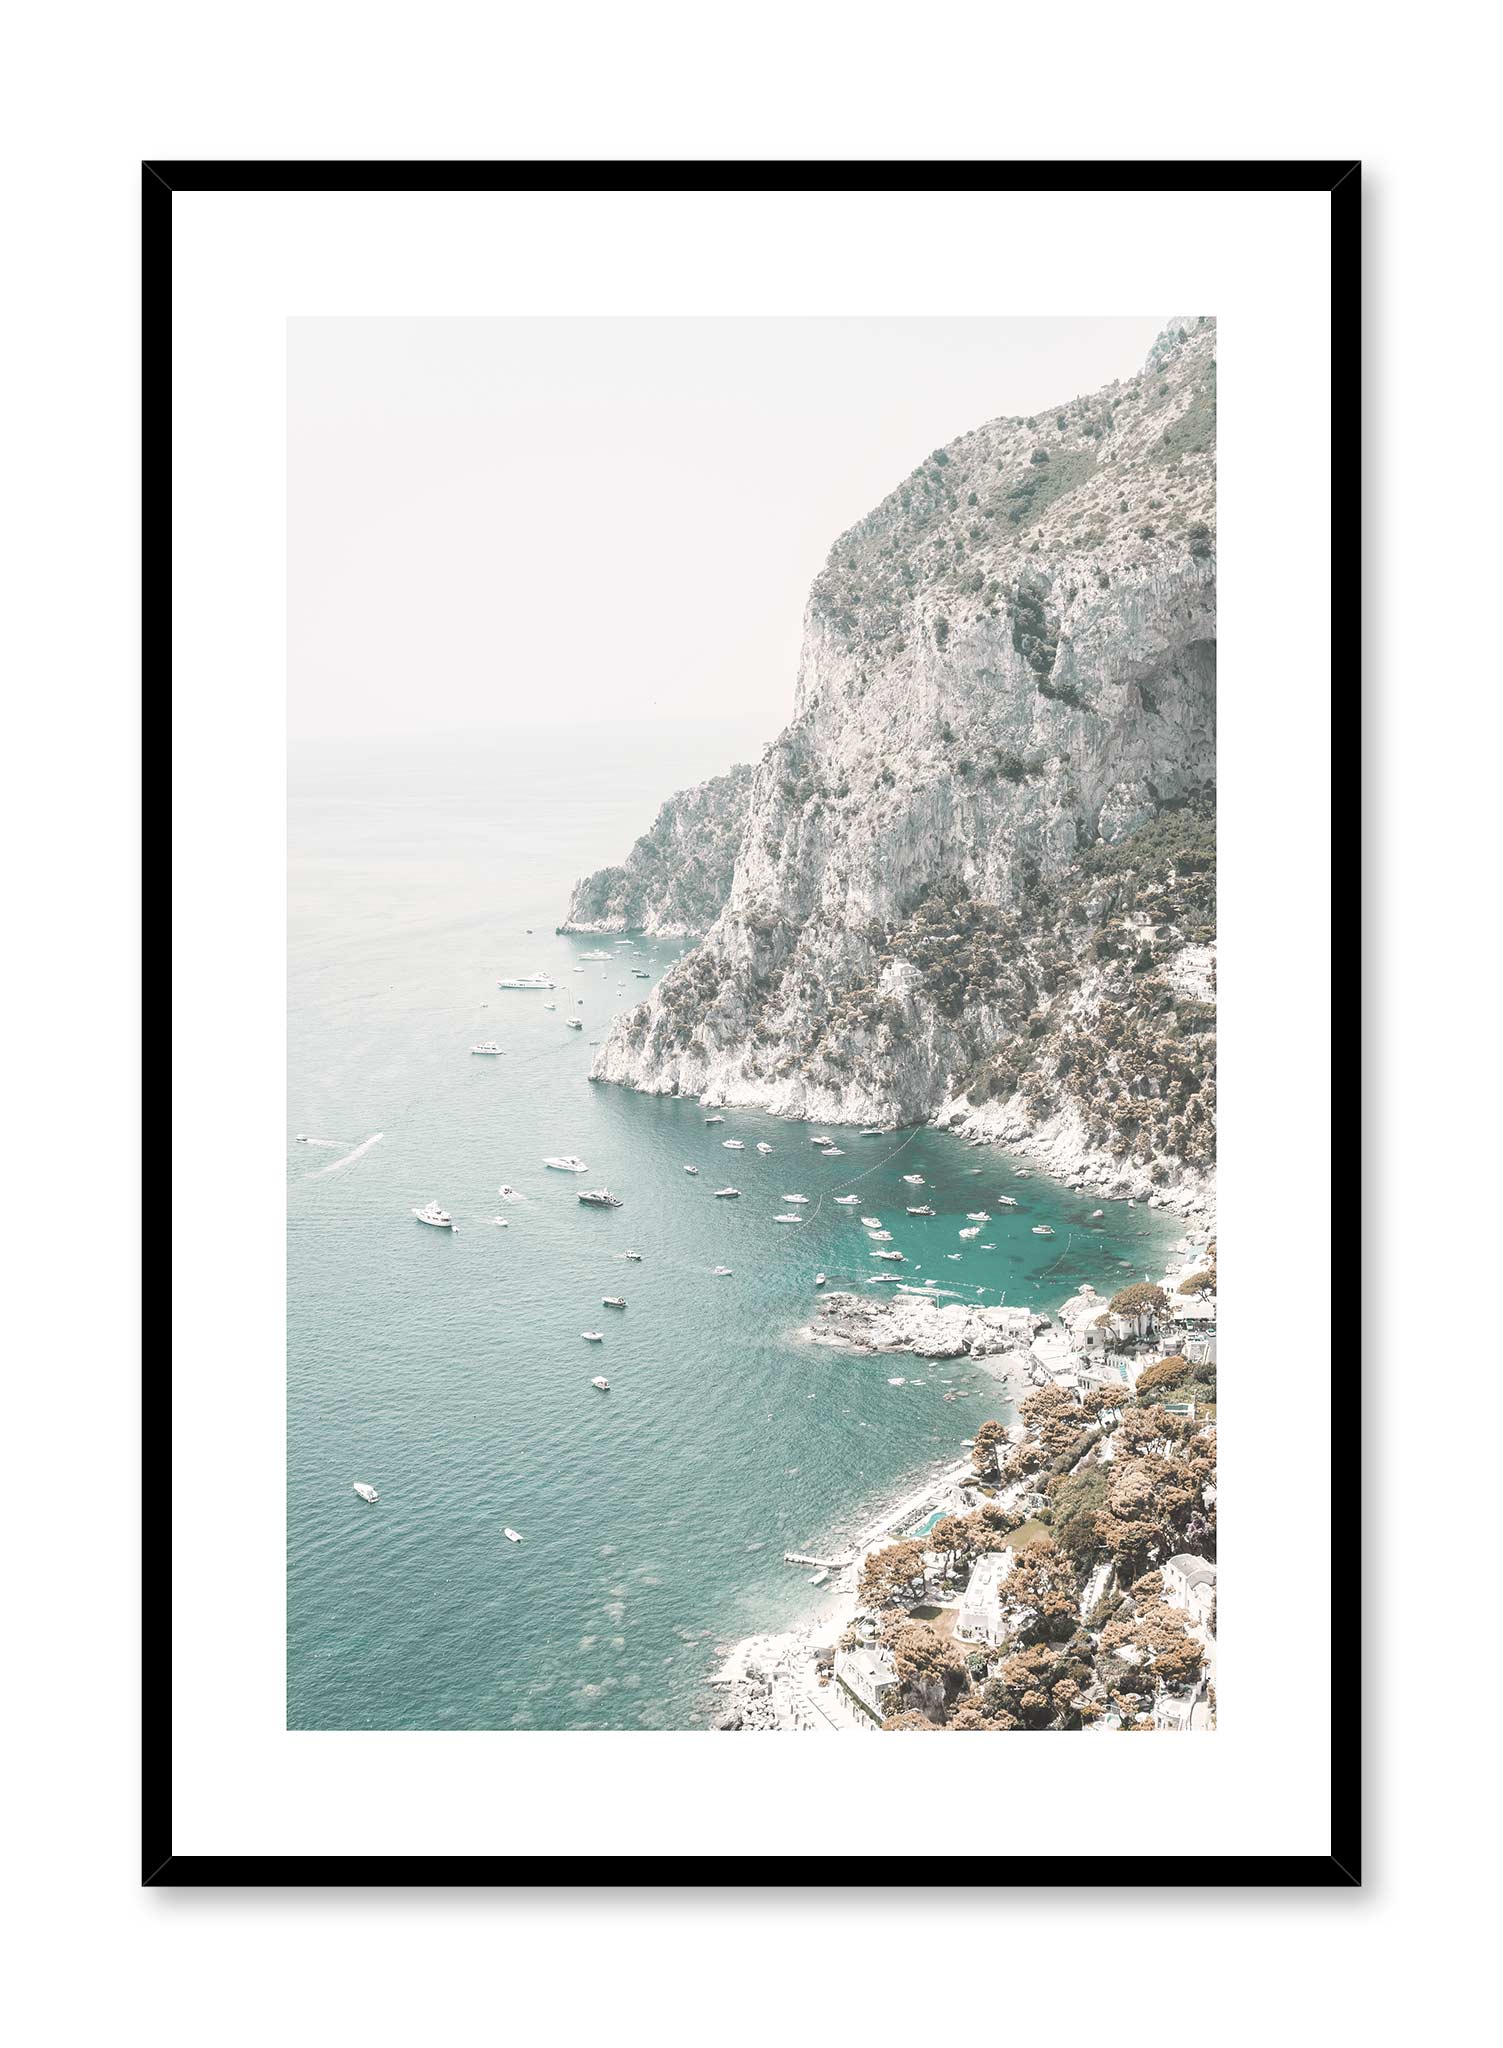 Holiday in Capri  Shop Posters & Prints Online at Opposite Wall